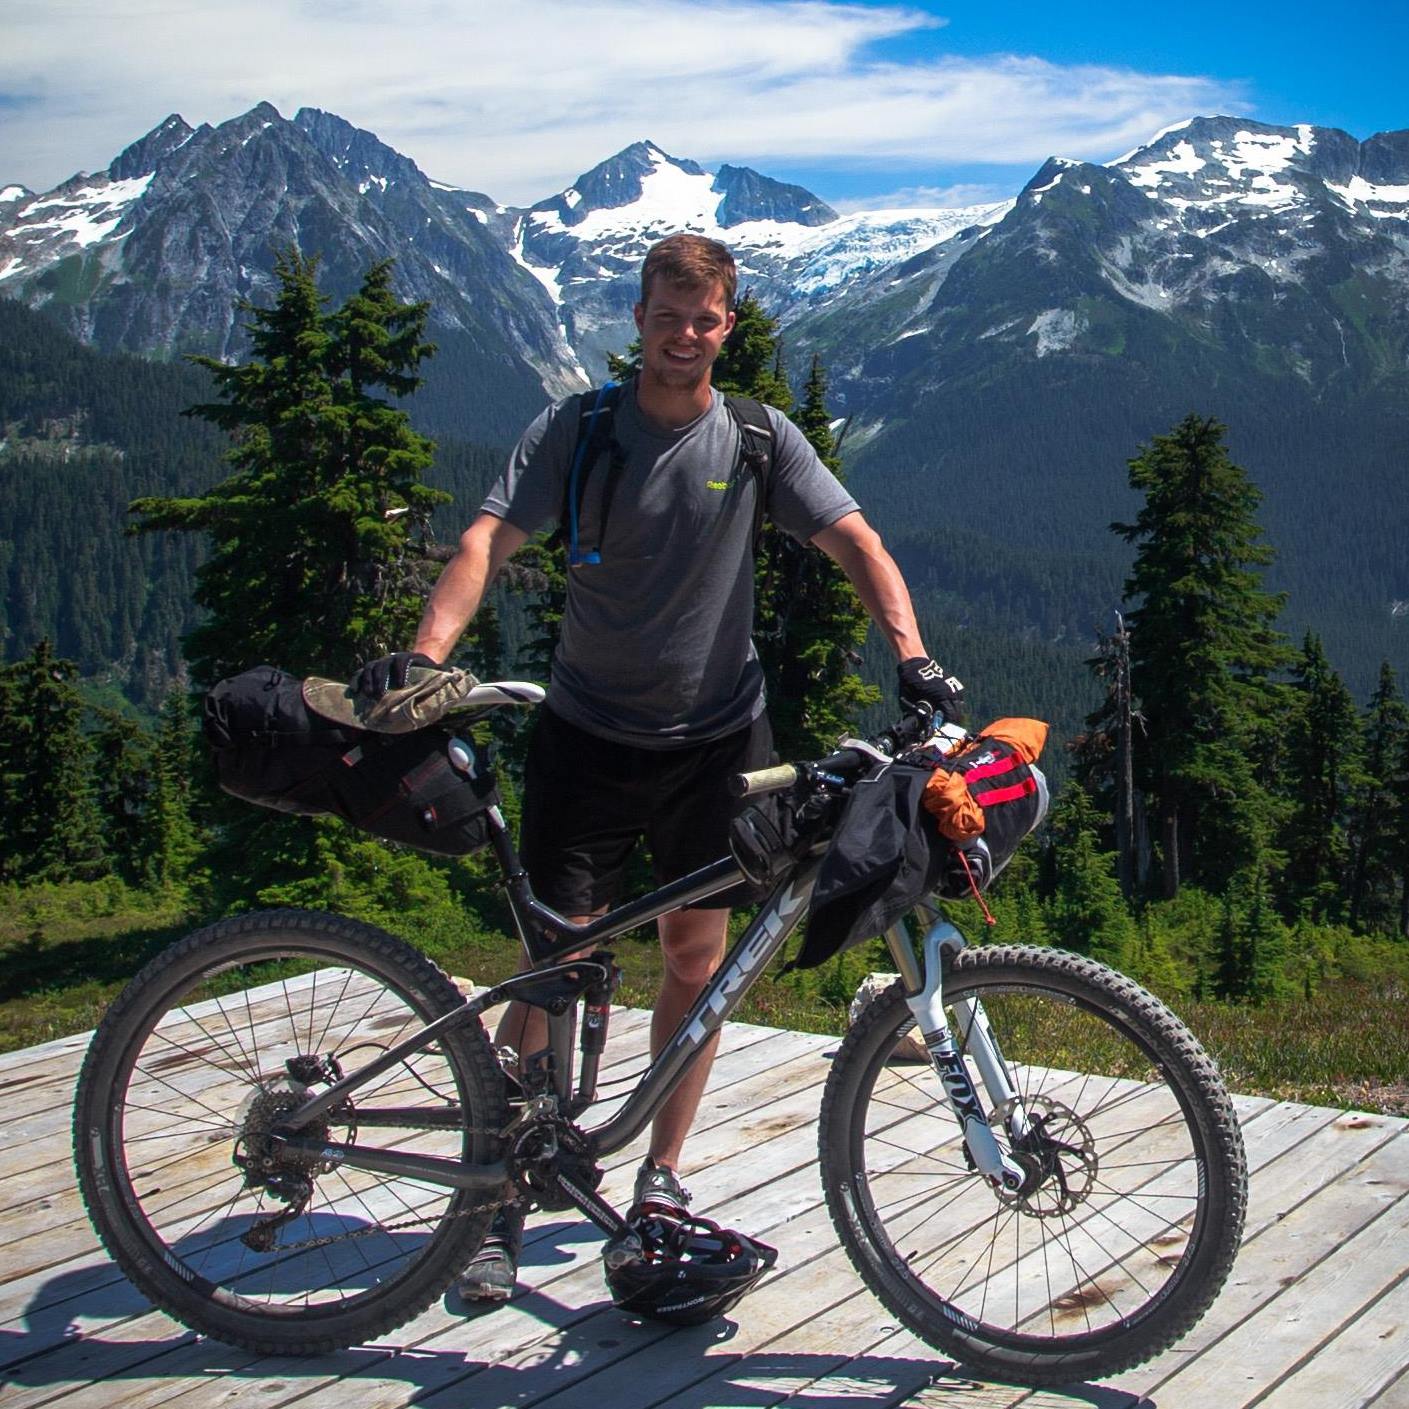 Matthew Bunker stands with his bicycle with snowcapped mountains in the background.